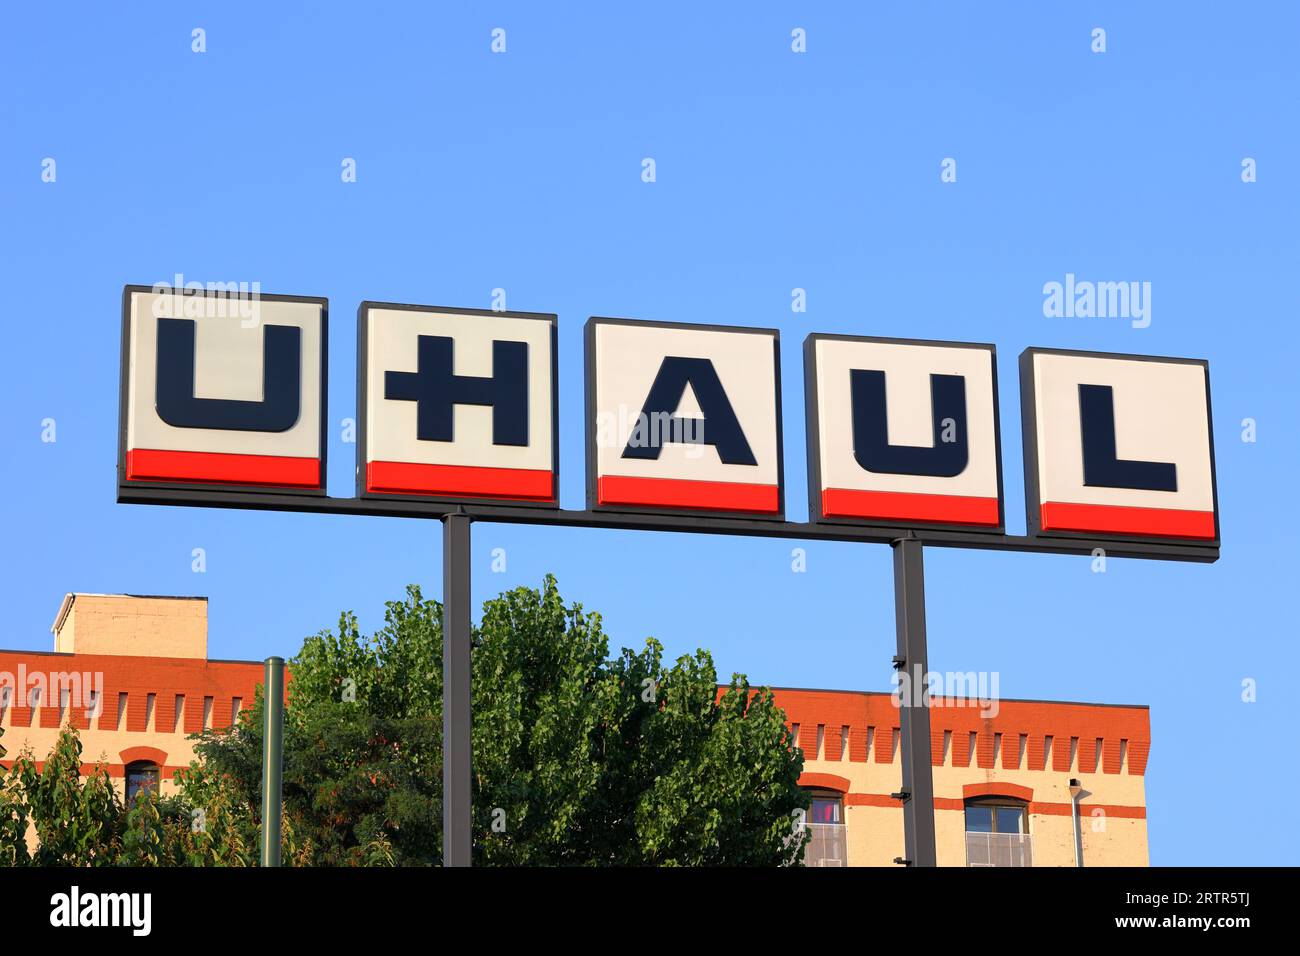 Pole signage for U Haul against a sunny blue sky. U Haul is a rental truck and moving storage company Stock Photo